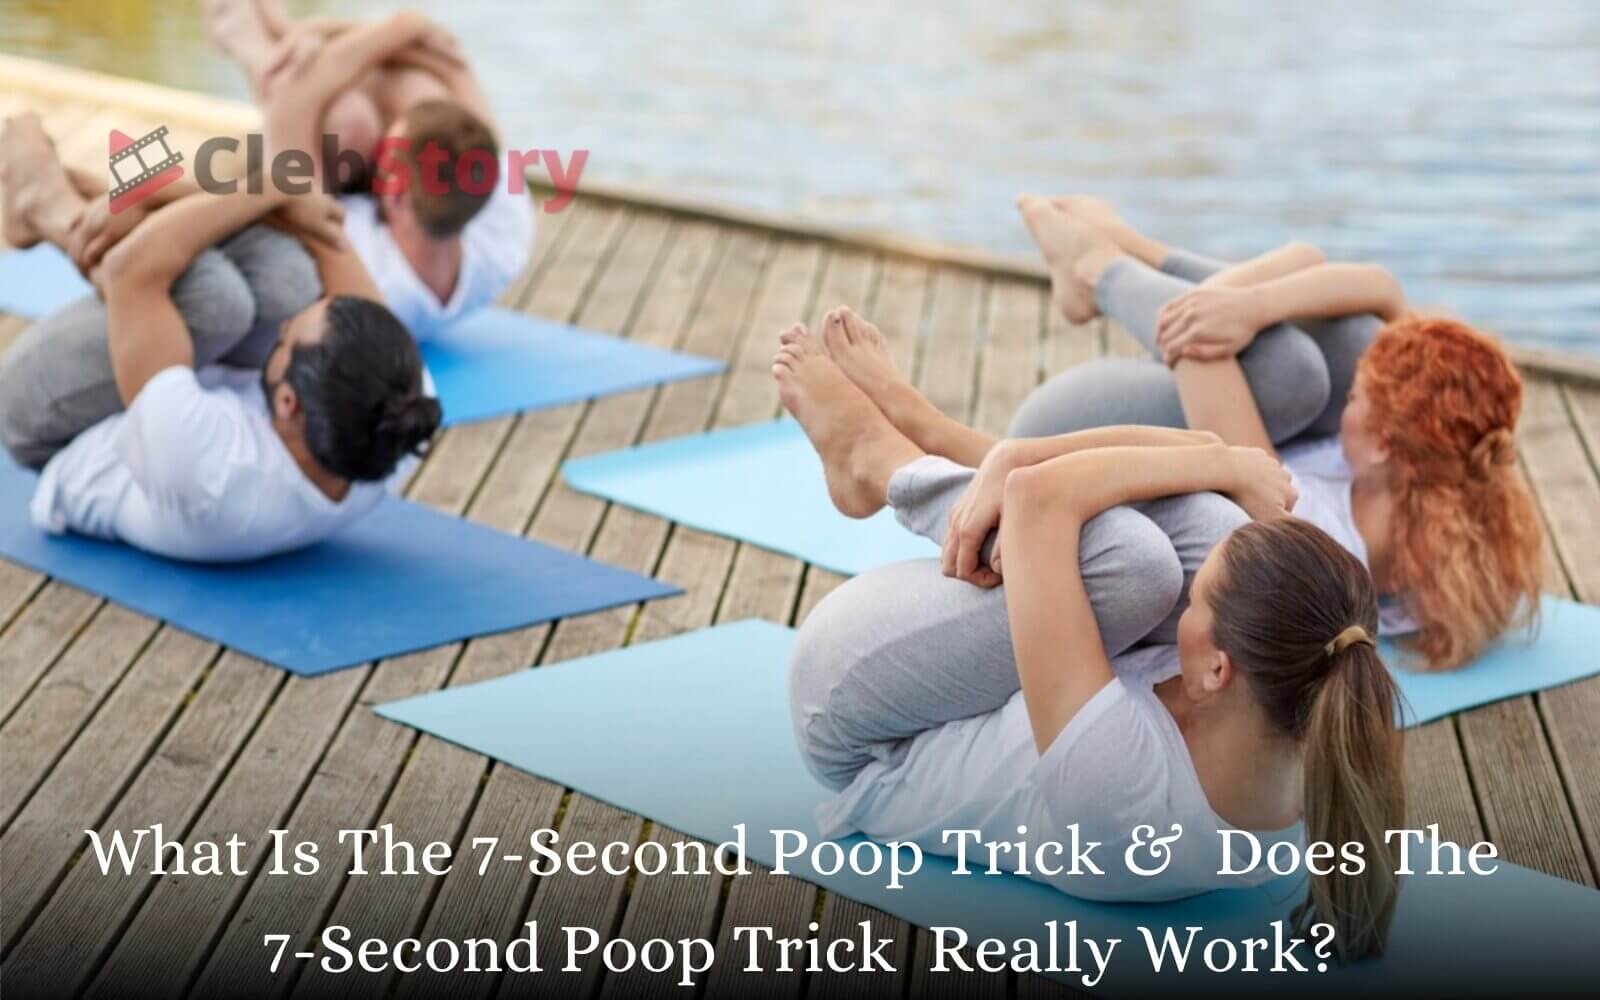 _how does The 7-Second Poop Trick Work